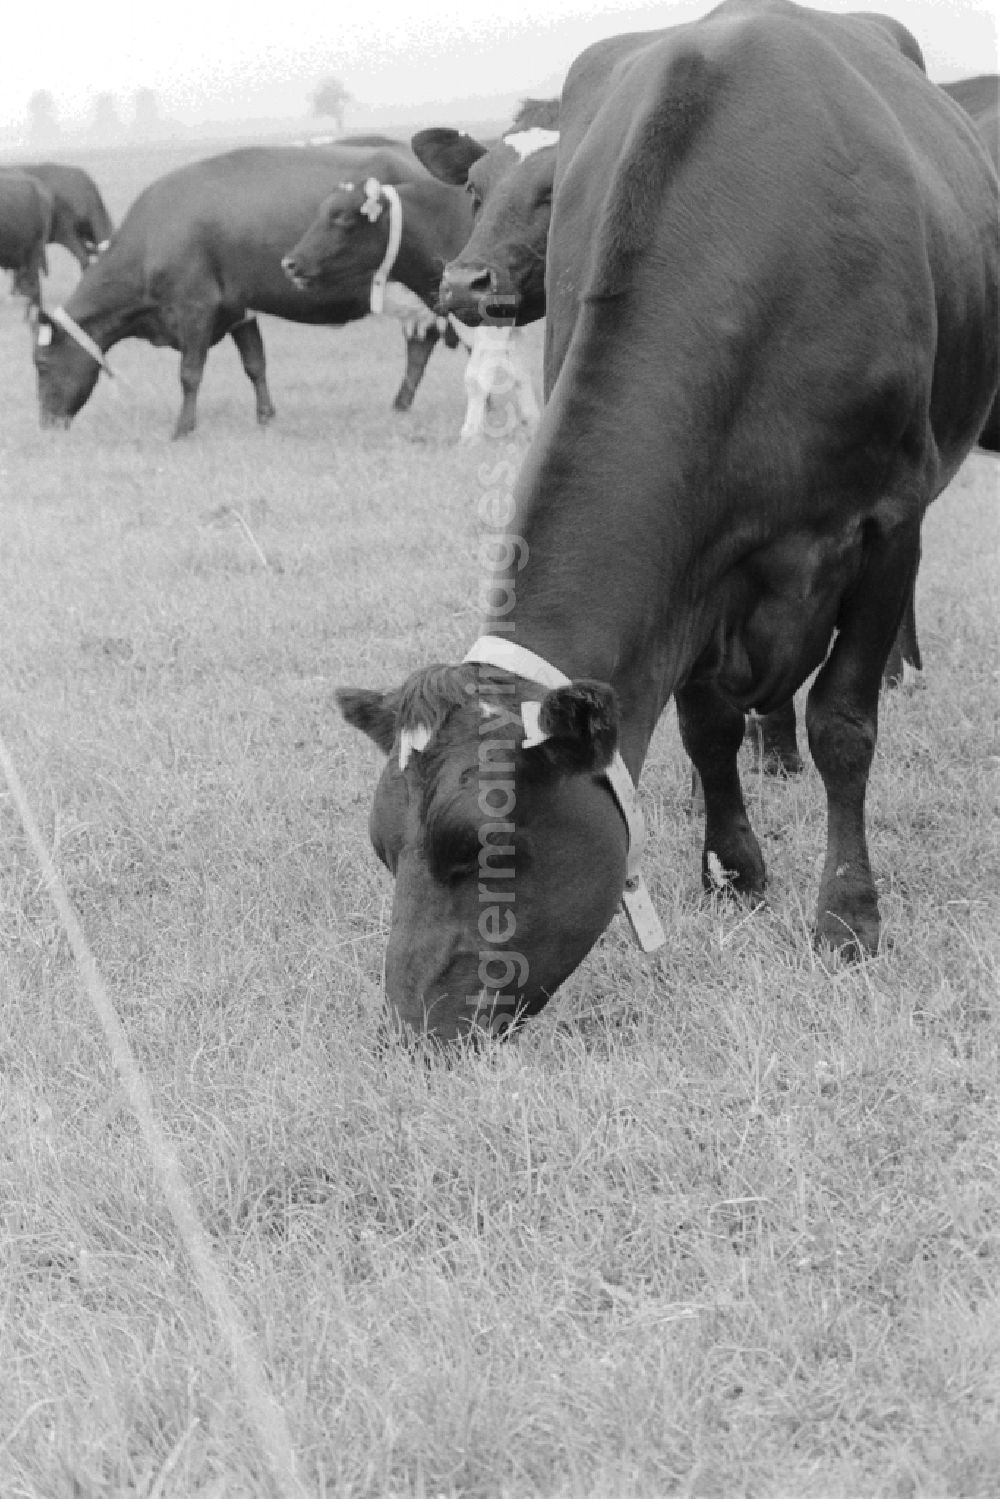 GDR image archive: Perleberg - Agriculture in the LPG - Animal Production Lanz in the former Perleberg, district of Schwerin, today in the state of Brandenburg in the area of the former GDR, German Democratic Republic. In the agricultural cooperative Lanz fodder for milk production was obtained mainly in meadows and pastures of the Labe region. For the Friesian cattle were milking. The meadows were irrigated dammed the water to from outfalls and the river Loecknitz and removed